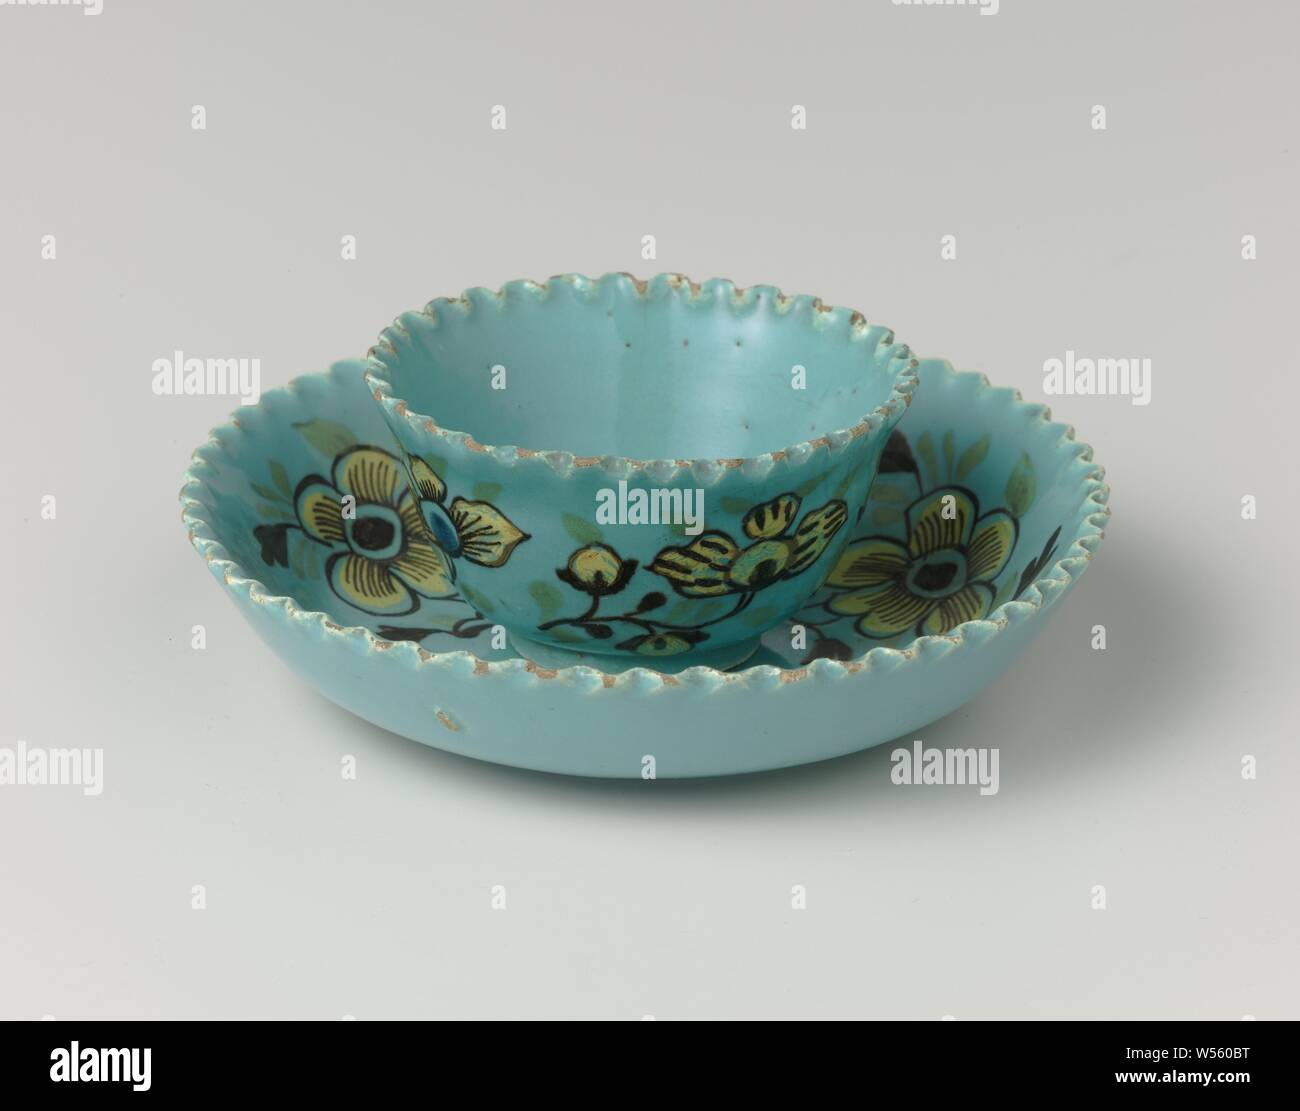 Cup and saucer, Cup and saucer of multi-colored faience. The cup and saucer are painted with yellow flowers on a turquoise background. The edges of the dish are serrated., anonymous, Delft, c. 1720 - c. 1750, earthenware, tin glaze, h 3.8 cm × w 6.5 cm h 2.5 cm × w 11.0 cm Stock Photo